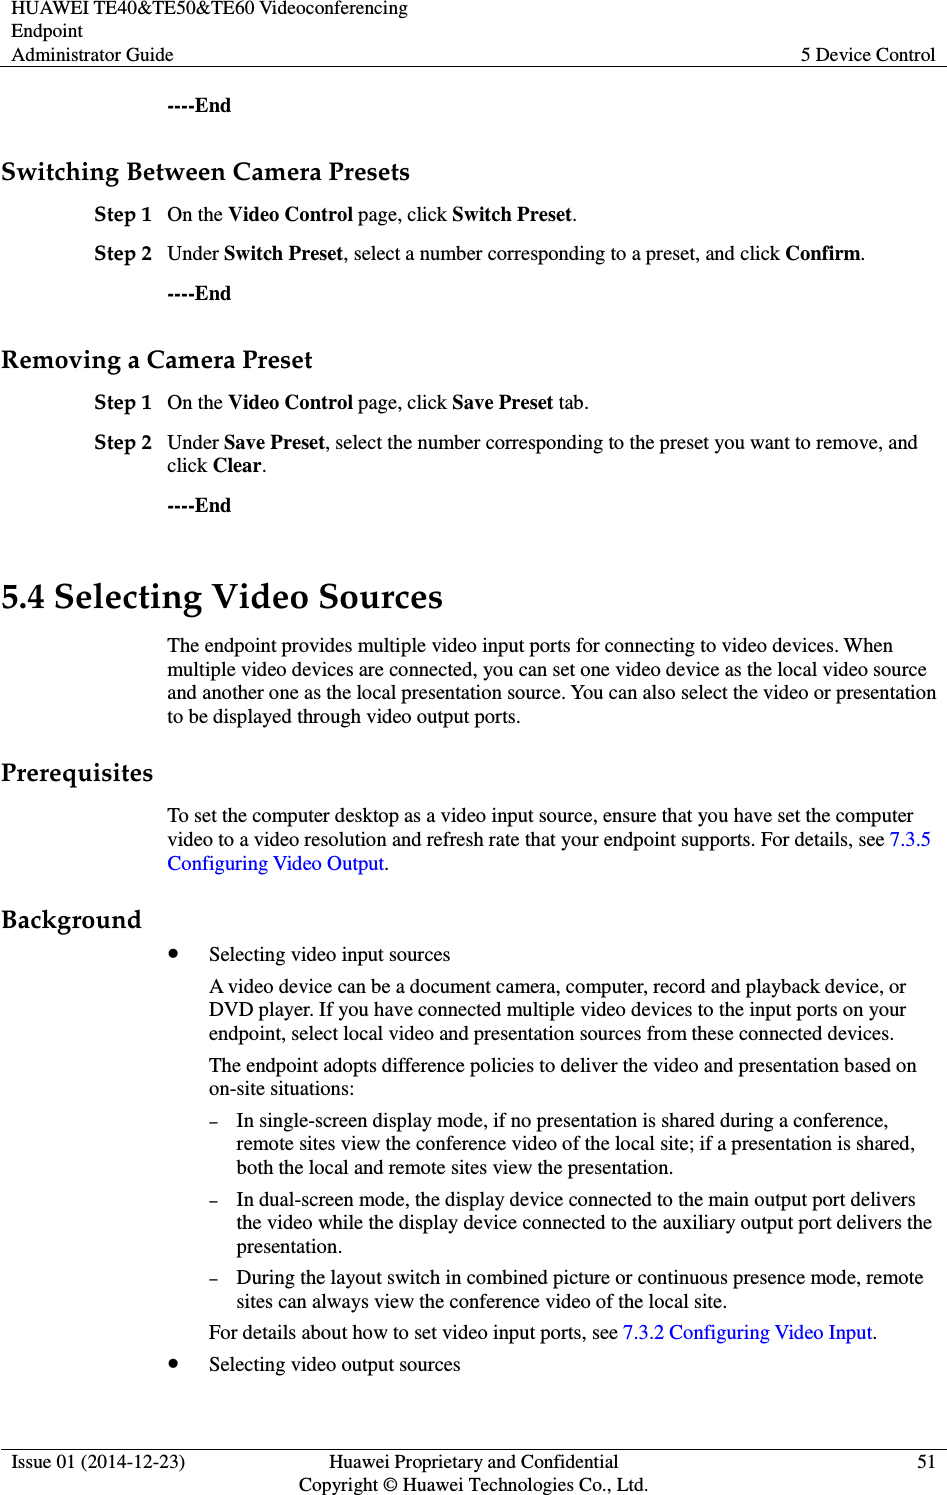 HUAWEI TE40&amp;TE50&amp;TE60 Videoconferencing Endpoint Administrator Guide  5 Device Control  Issue 01 (2014-12-23)  Huawei Proprietary and Confidential                                     Copyright © Huawei Technologies Co., Ltd. 51  ----End Switching Between Camera Presets Step 1 On the Video Control page, click Switch Preset. Step 2 Under Switch Preset, select a number corresponding to a preset, and click Confirm. ----End Removing a Camera Preset Step 1 On the Video Control page, click Save Preset tab. Step 2 Under Save Preset, select the number corresponding to the preset you want to remove, and click Clear. ----End 5.4 Selecting Video Sources The endpoint provides multiple video input ports for connecting to video devices. When multiple video devices are connected, you can set one video device as the local video source and another one as the local presentation source. You can also select the video or presentation to be displayed through video output ports. Prerequisites To set the computer desktop as a video input source, ensure that you have set the computer video to a video resolution and refresh rate that your endpoint supports. For details, see 7.3.5 Configuring Video Output. Background  Selecting video input sources A video device can be a document camera, computer, record and playback device, or DVD player. If you have connected multiple video devices to the input ports on your endpoint, select local video and presentation sources from these connected devices. The endpoint adopts difference policies to deliver the video and presentation based on on-site situations: − In single-screen display mode, if no presentation is shared during a conference, remote sites view the conference video of the local site; if a presentation is shared, both the local and remote sites view the presentation. − In dual-screen mode, the display device connected to the main output port delivers the video while the display device connected to the auxiliary output port delivers the presentation. − During the layout switch in combined picture or continuous presence mode, remote sites can always view the conference video of the local site. For details about how to set video input ports, see 7.3.2 Configuring Video Input.  Selecting video output sources 